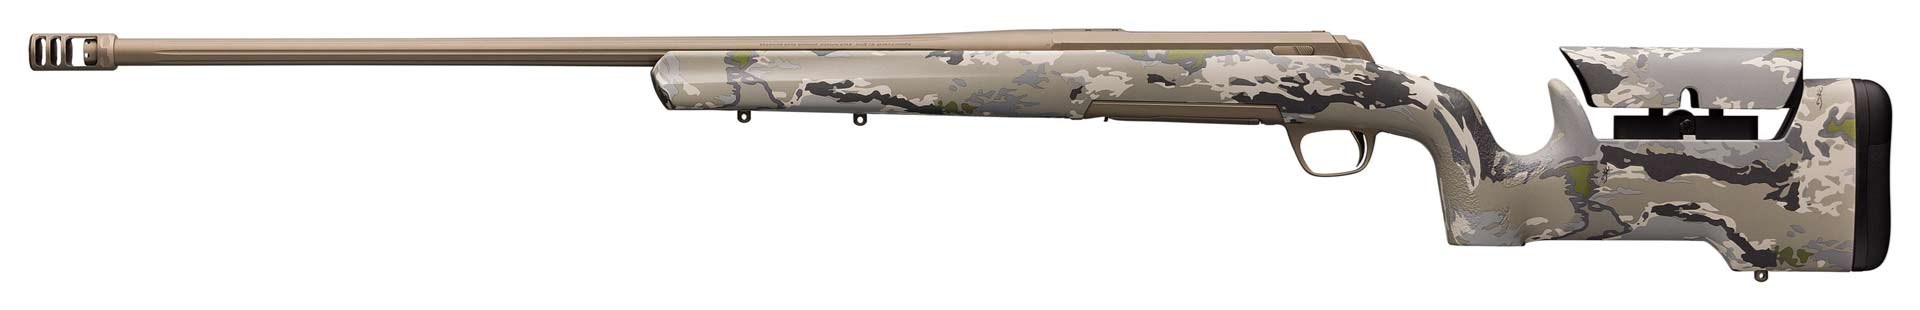 Left-side view of Browning Arms X-Bolt Hell's Canyon Max LR bolt-action rifle camouflage stock Cerakot Bronze metal action barrel.